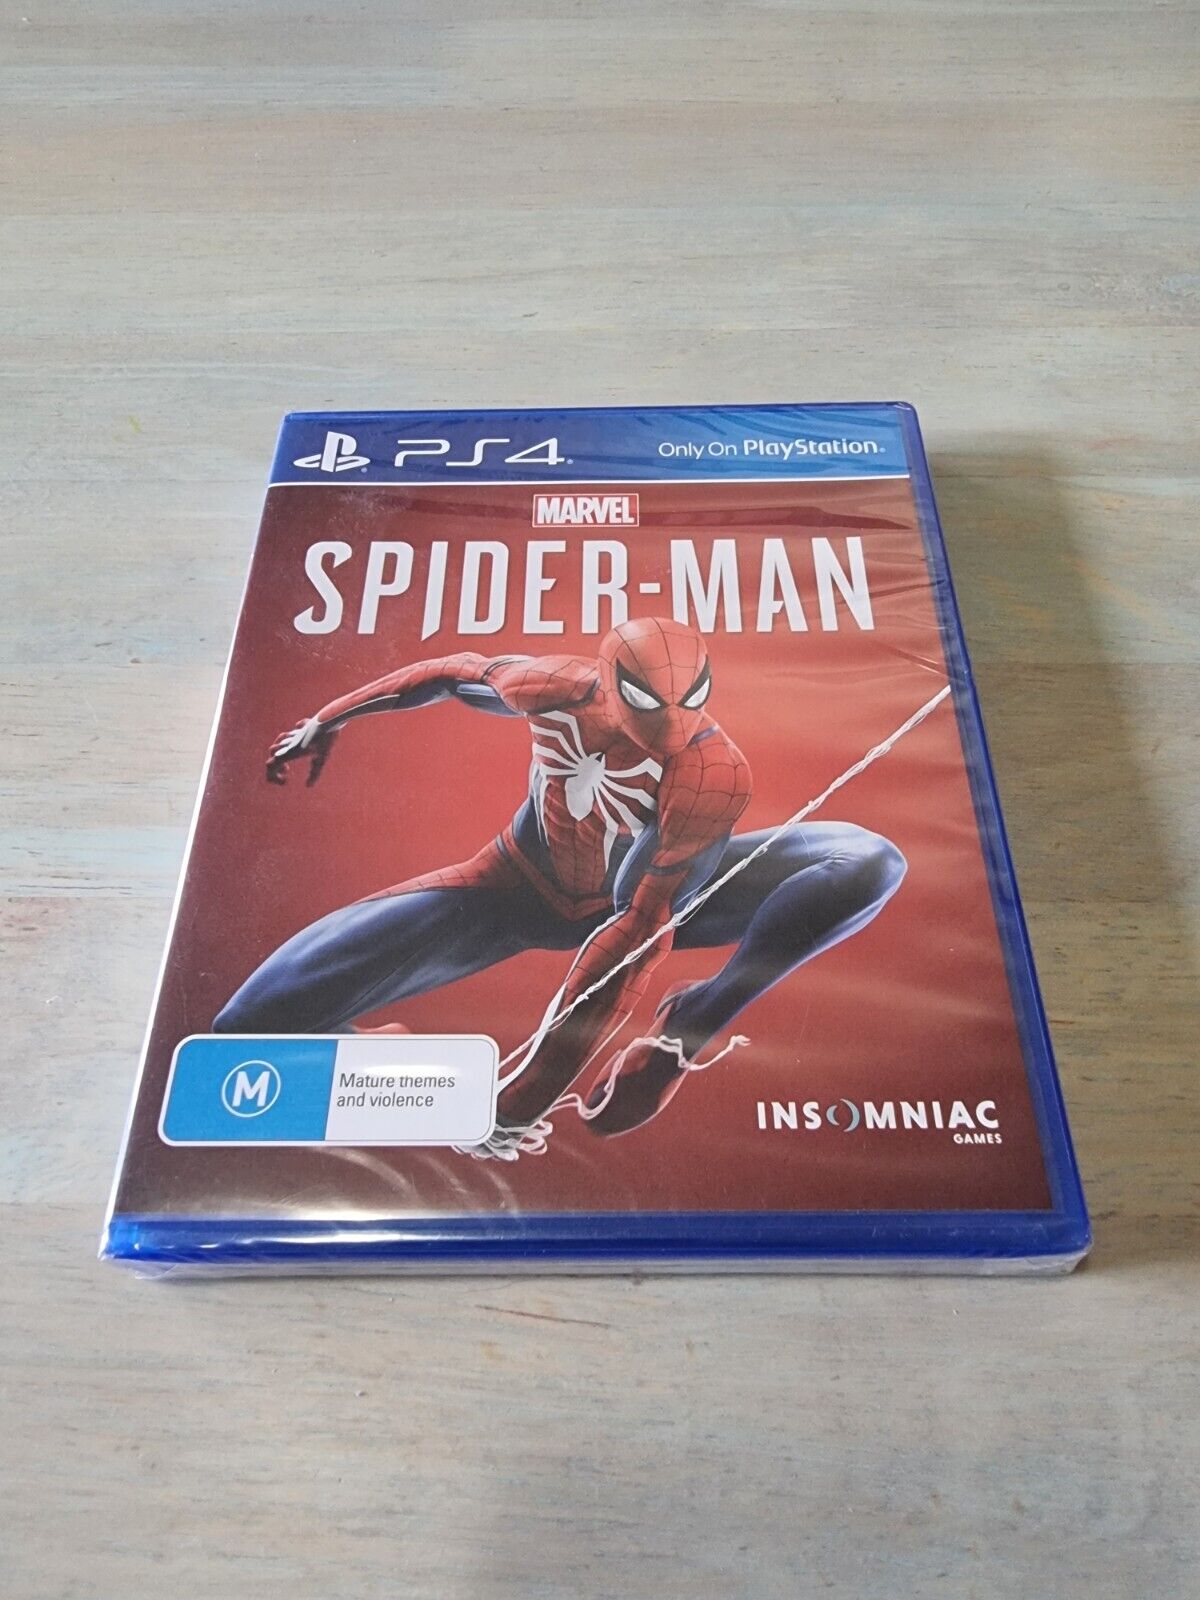 Marvel's Spider-Man (PS4, 2018) Brand New and Sealed - WITH WARRANTY